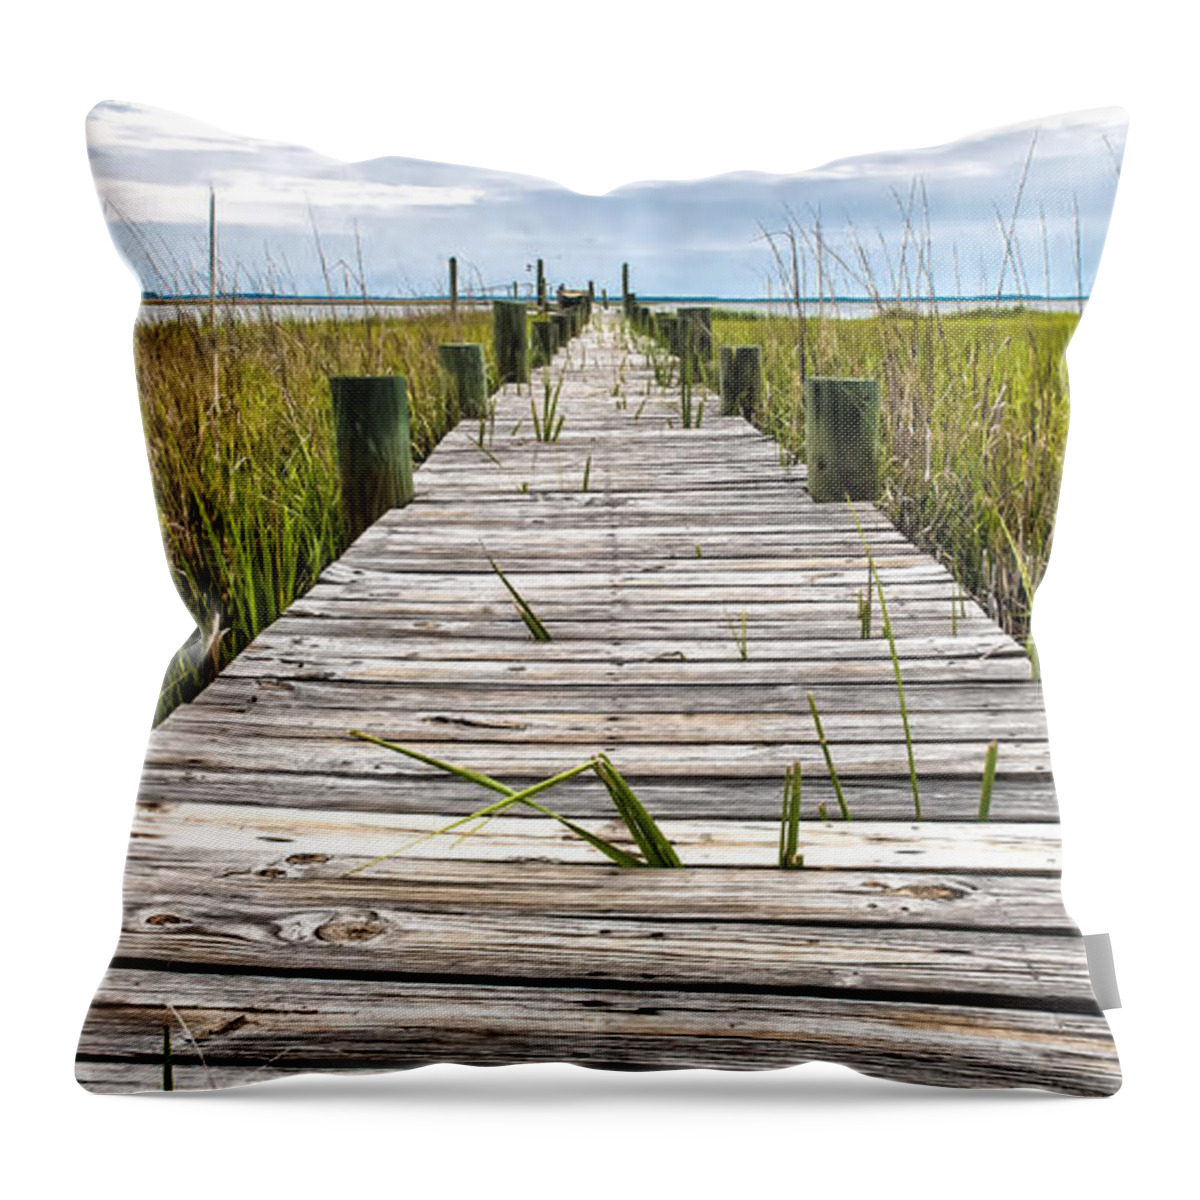 Chisolm Island Throw Pillow featuring the photograph McTeer Dock by Scott C Hansen